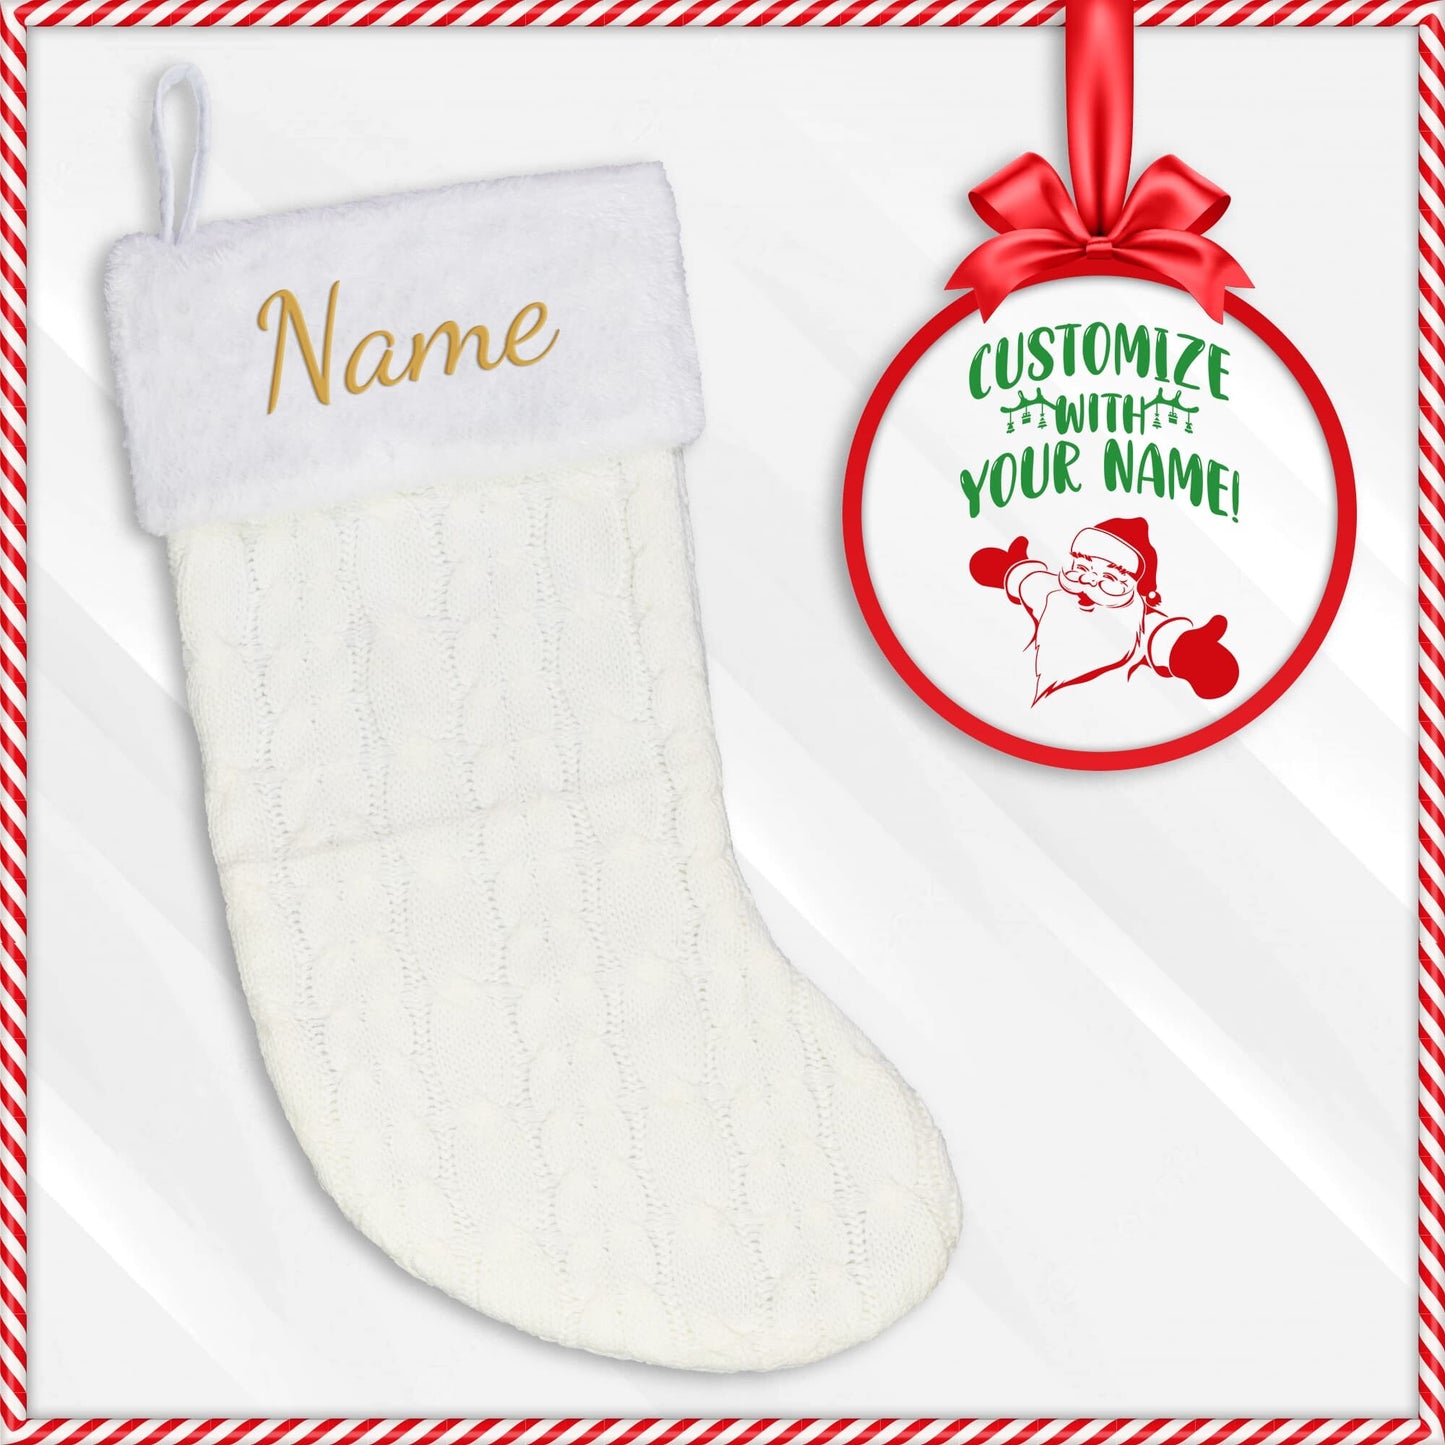 Celebrate the holidays with a custom embroidered stocking